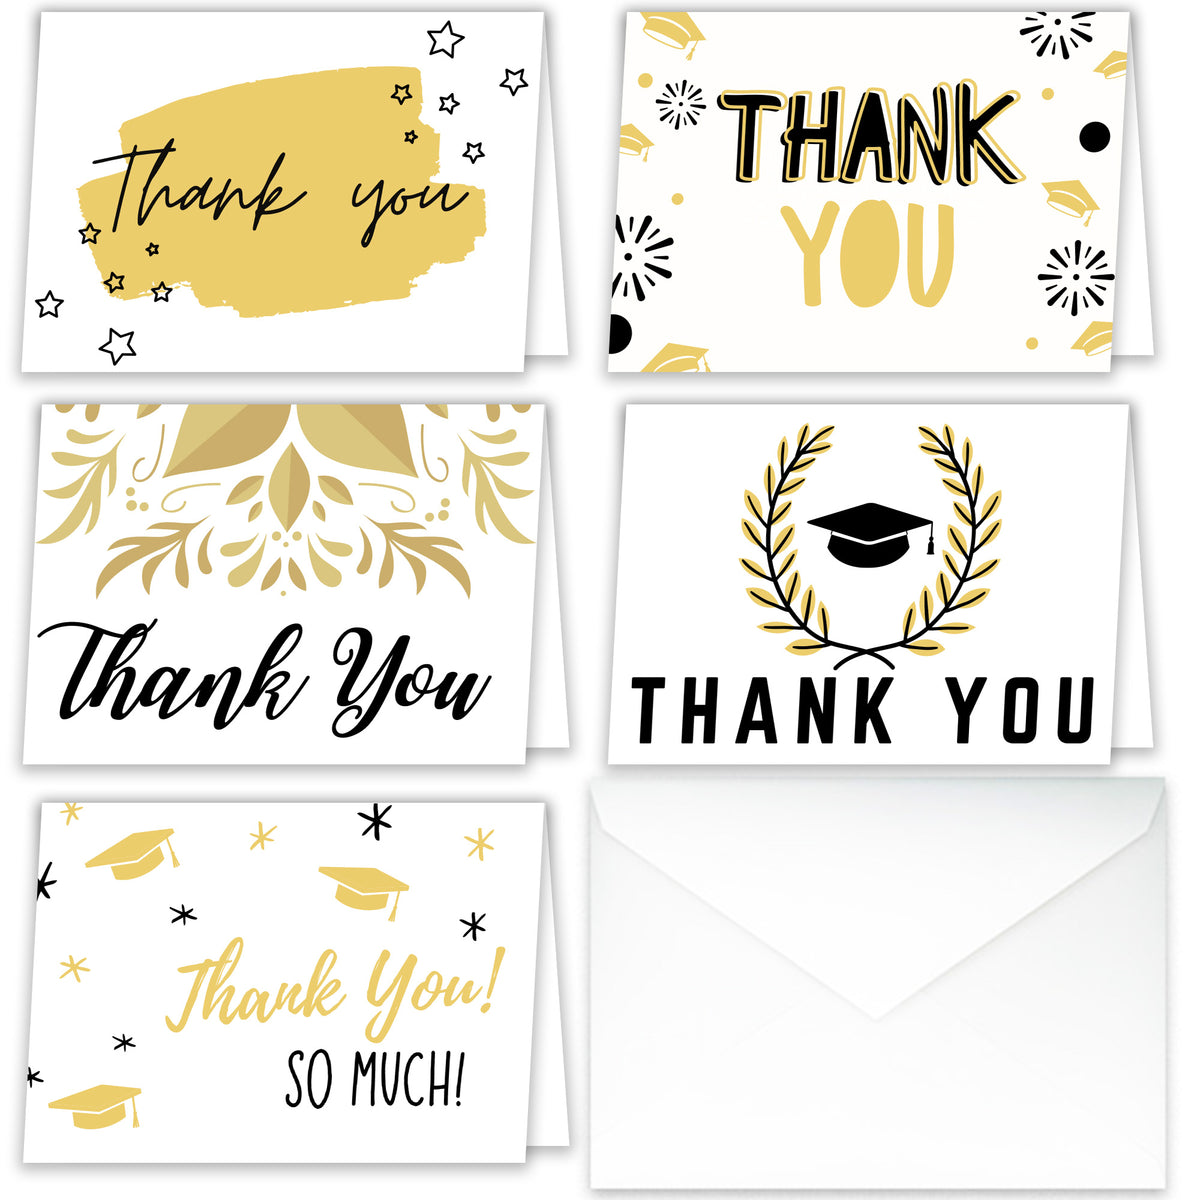 Pre-Printed Folded A1 Graduation Thank you Cards and Envelopes - 25 pack